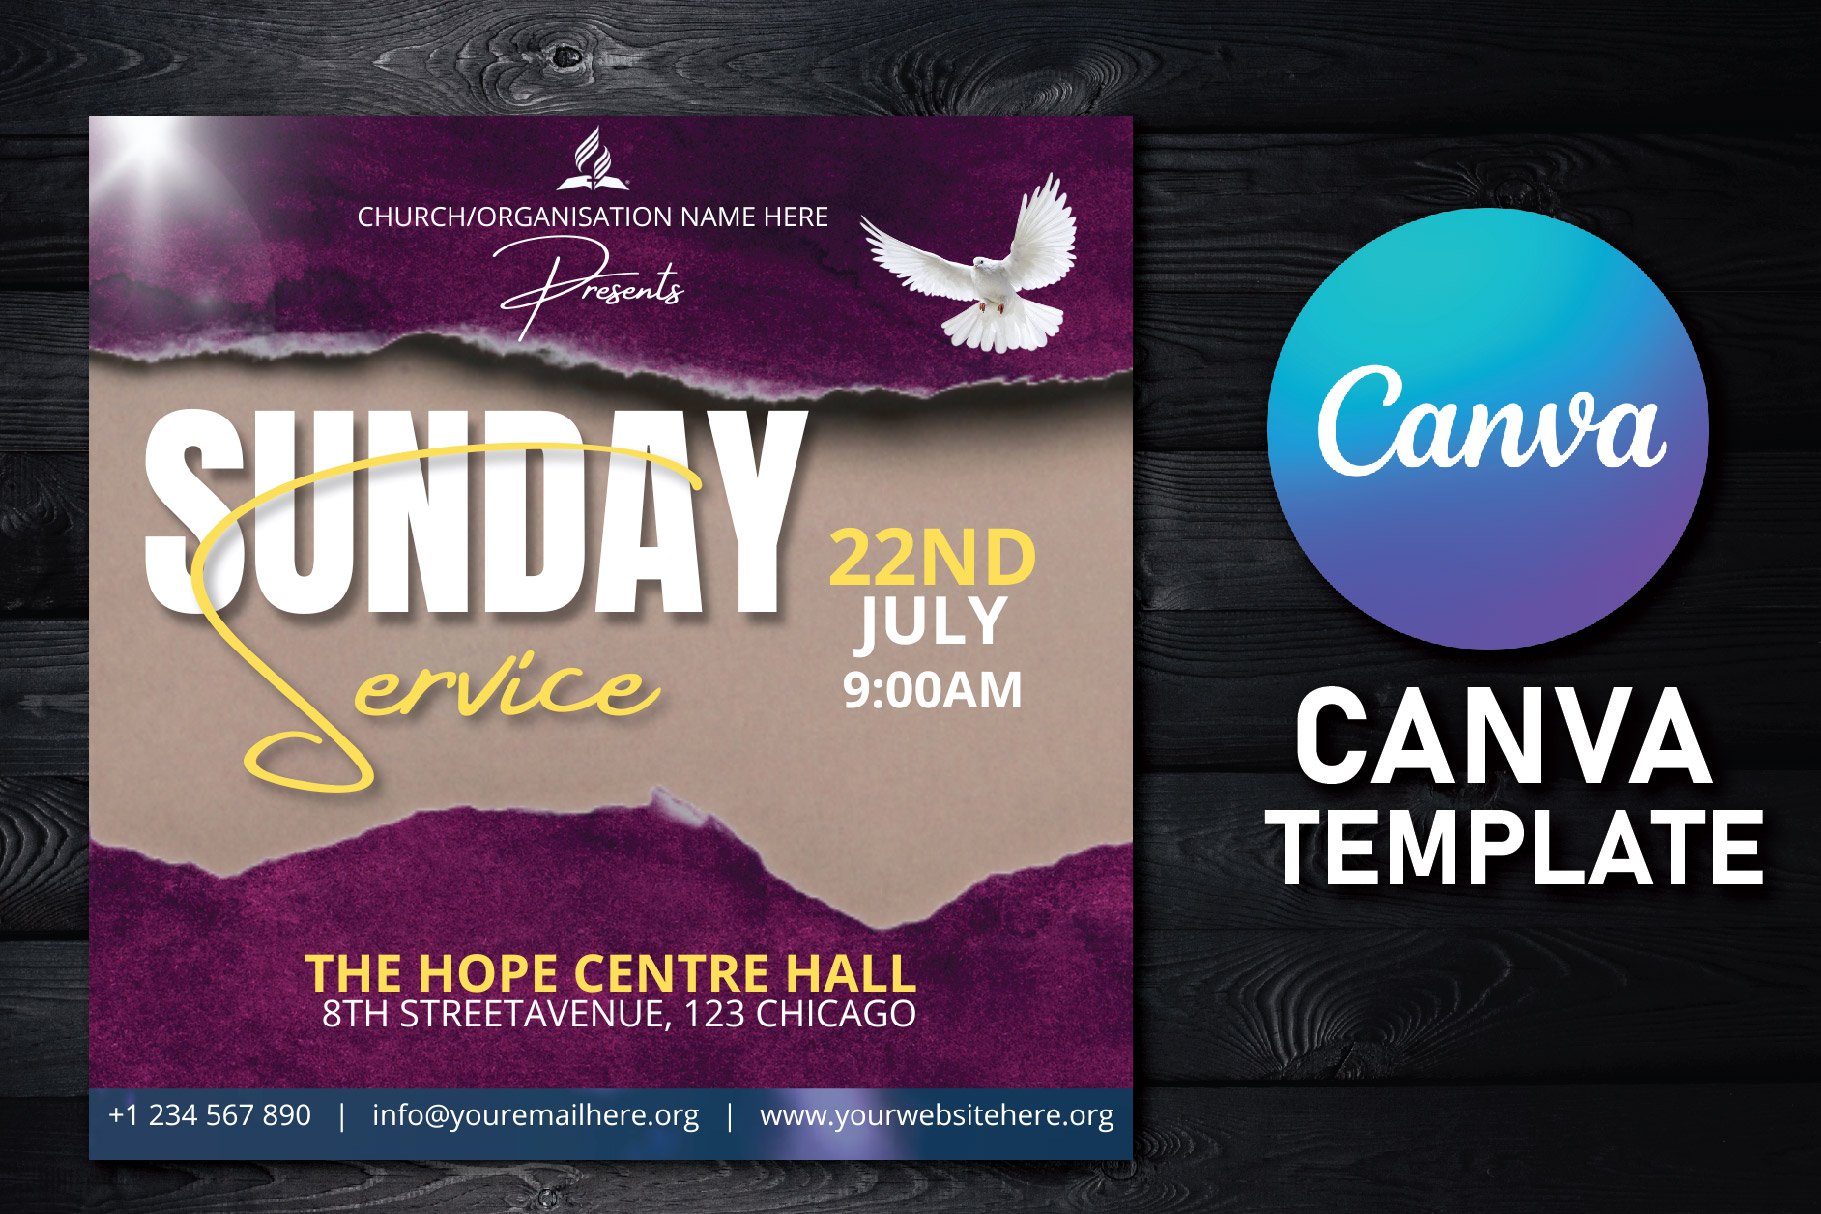 CHURCH SERVICE FLYER CANVA TEMPLATE cover image.